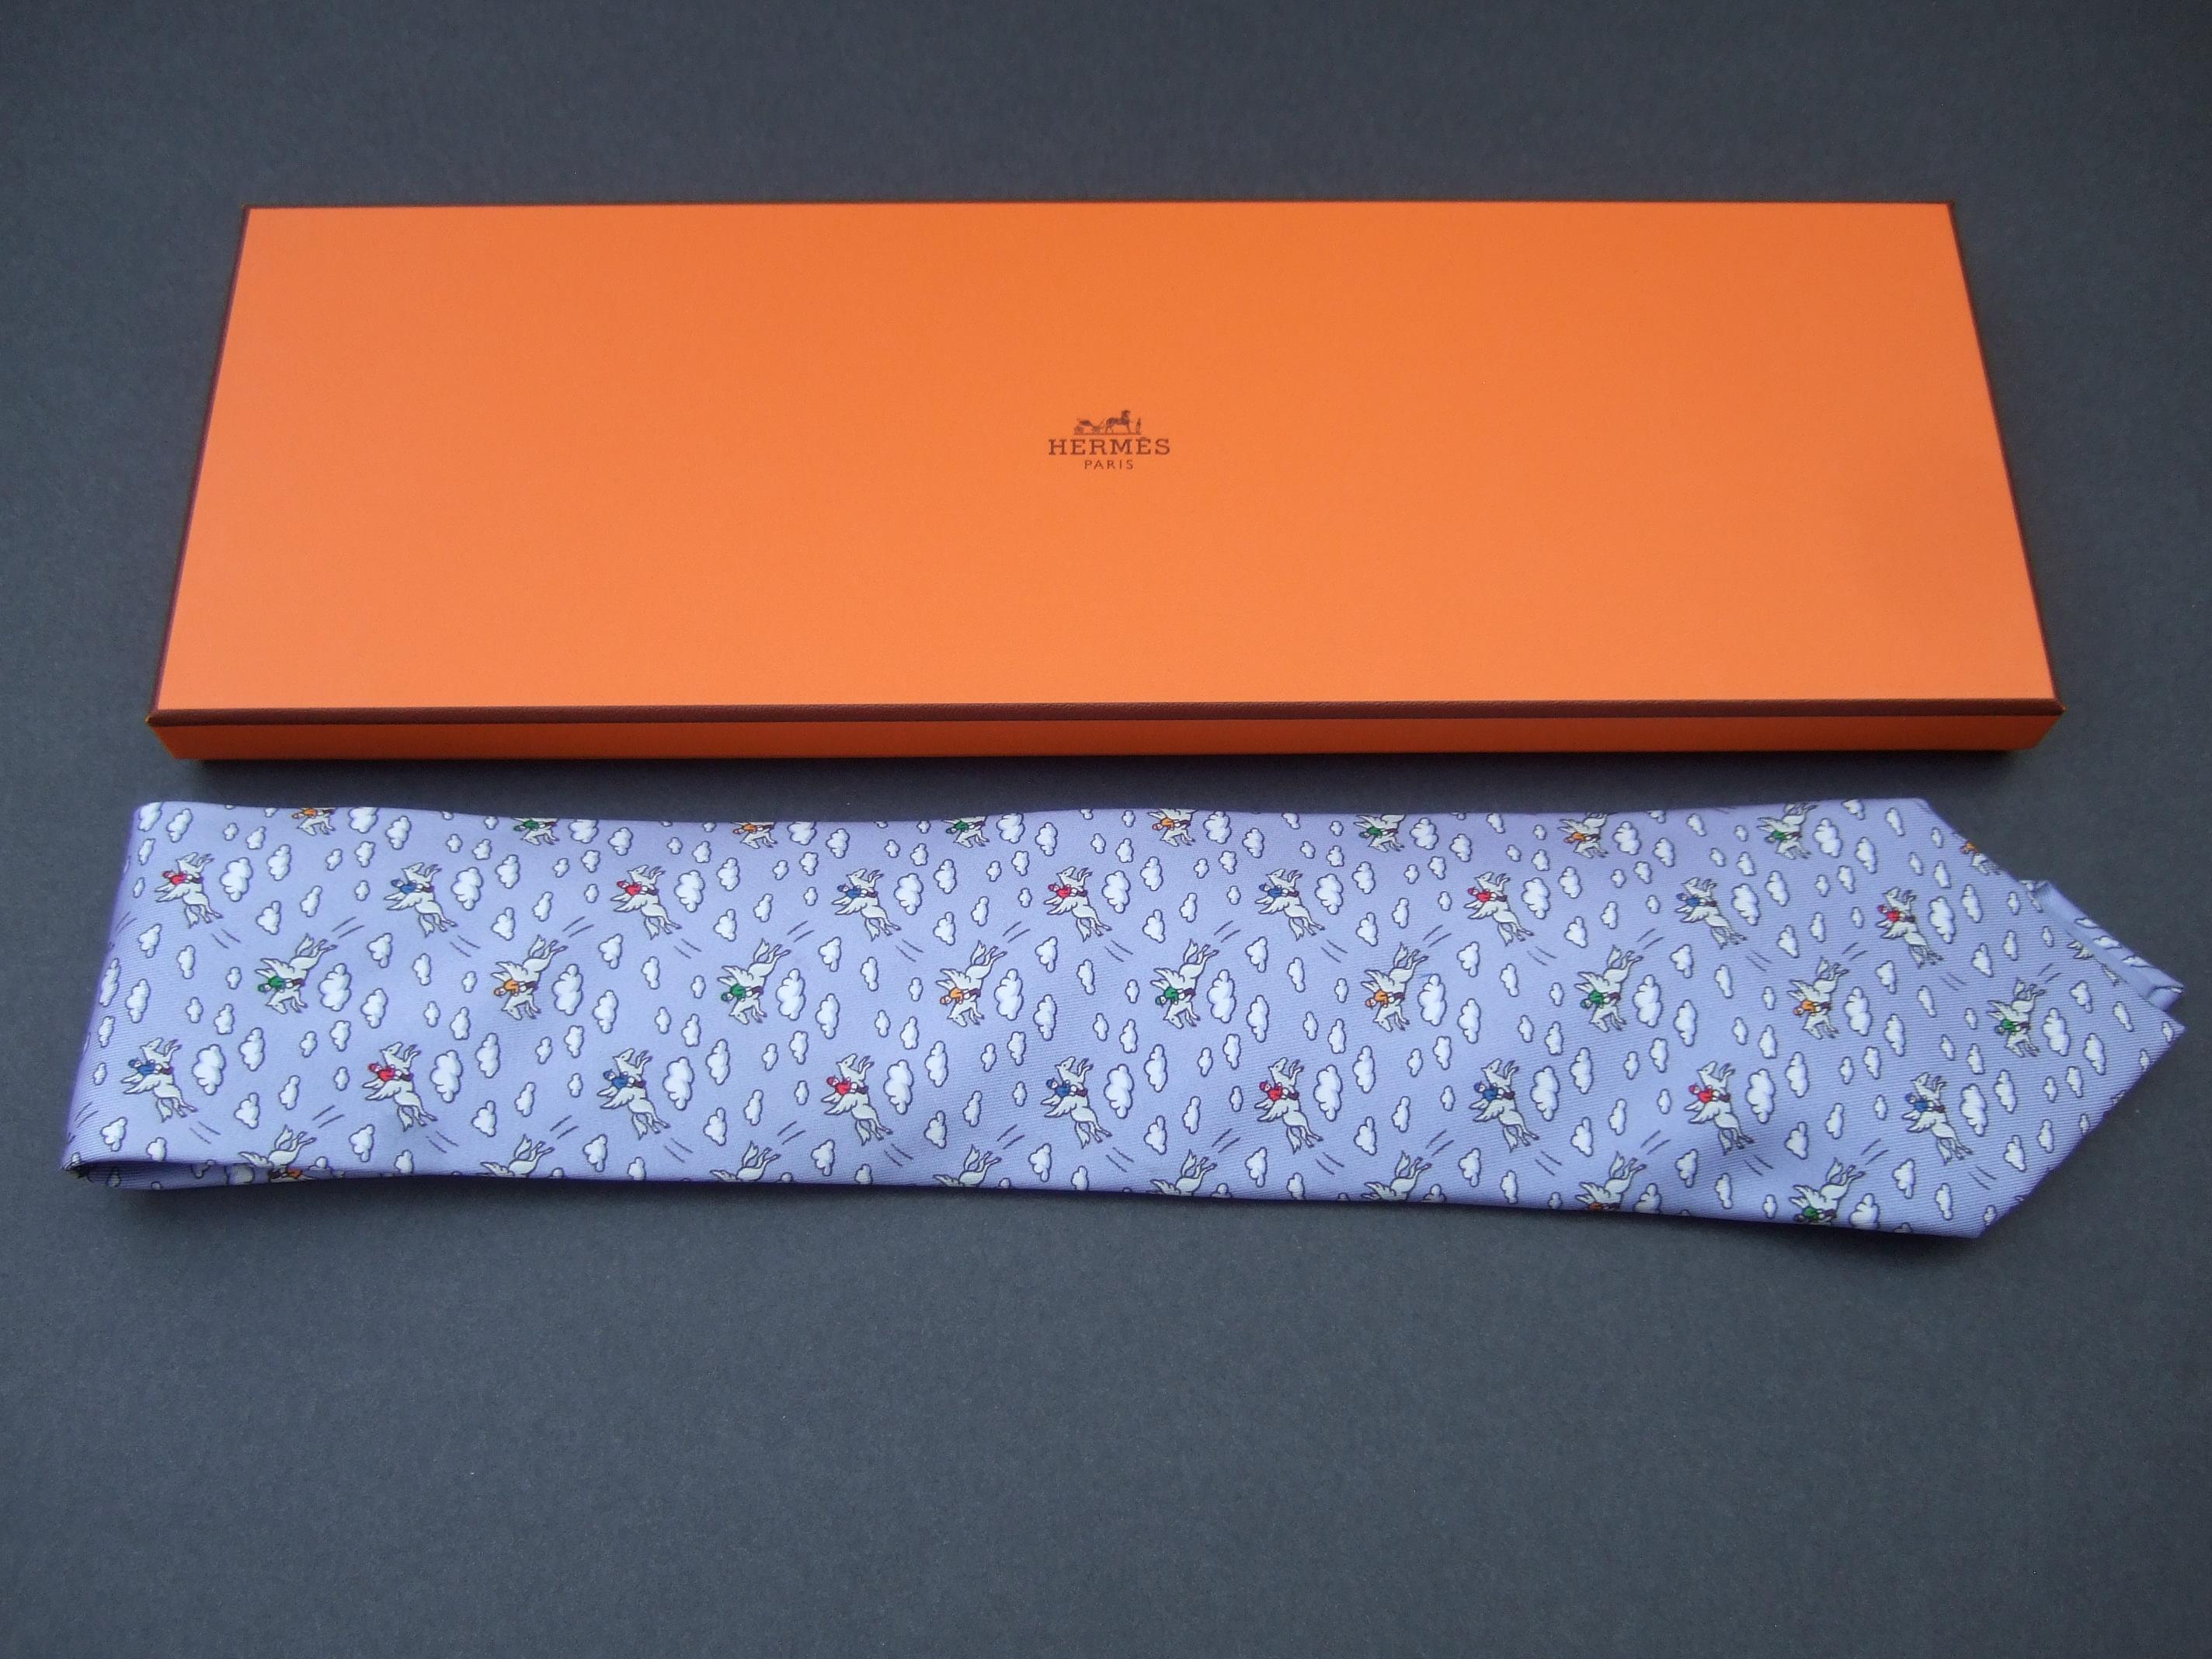 Hermes Paris Whimsical Silk Flying Pegasus Rider Necktie in Hermes Box c 1990s  In Good Condition For Sale In University City, MO